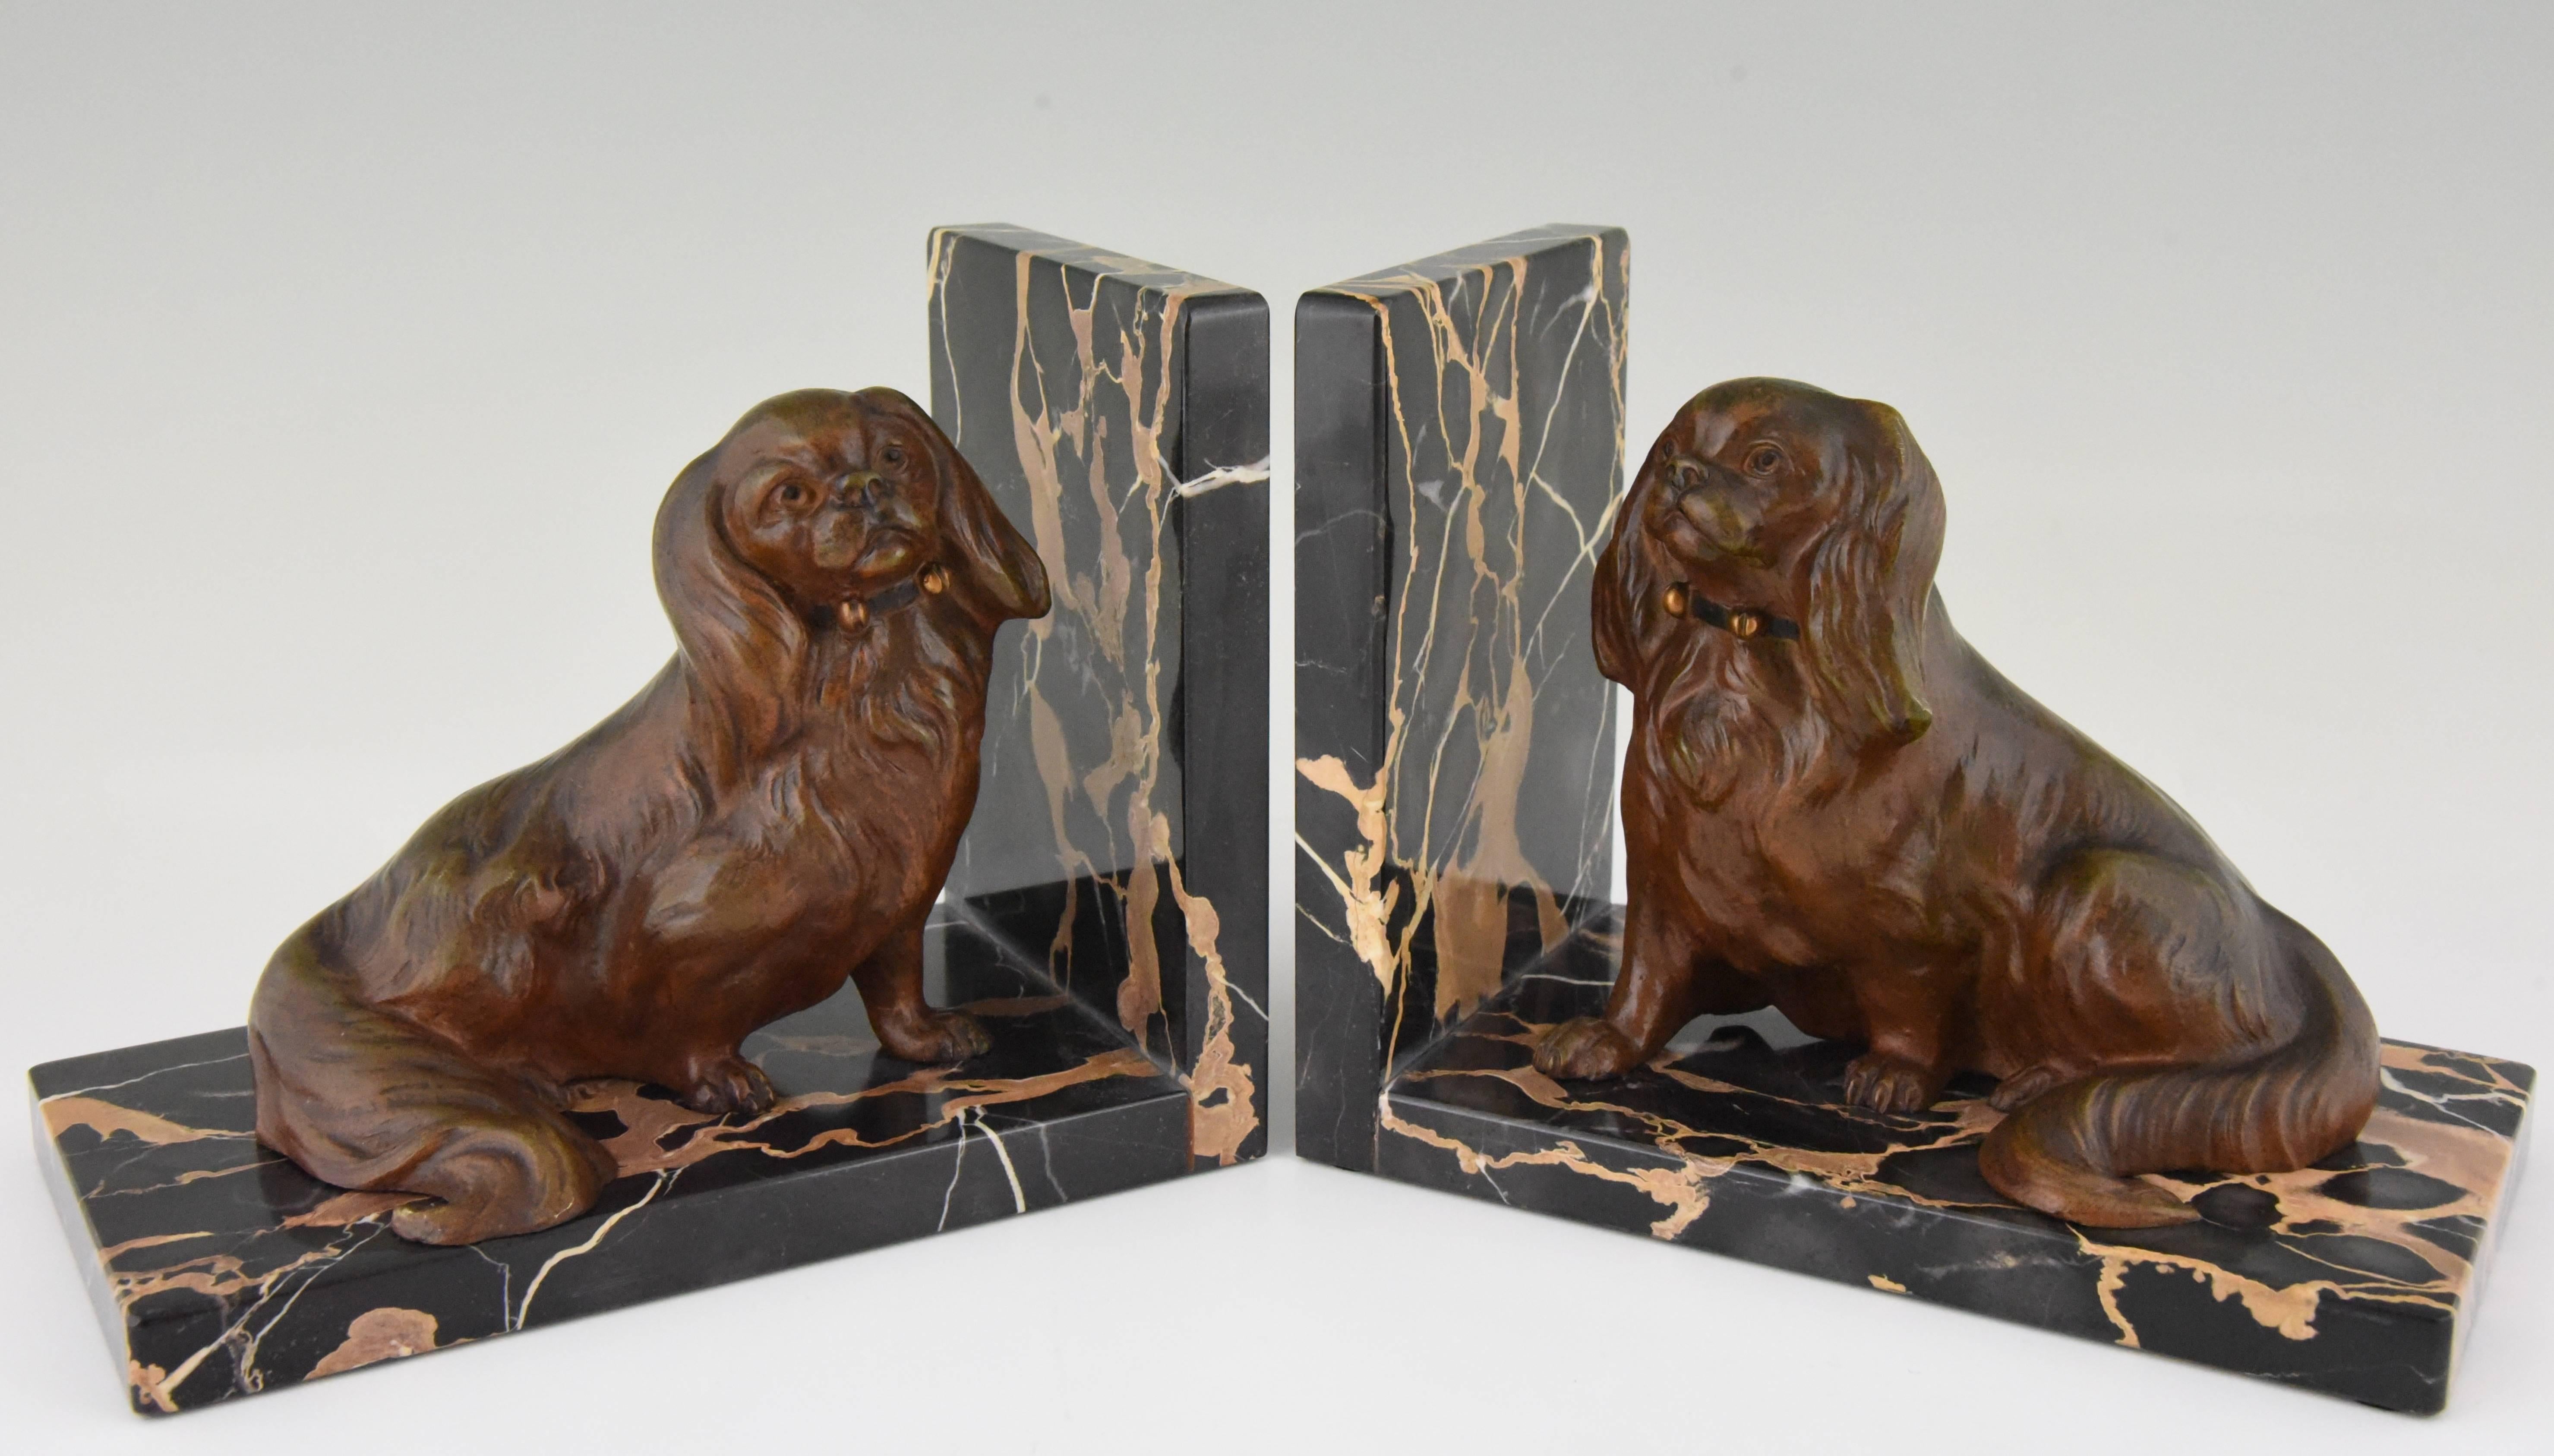 French Art Deco Bronze Bookends King Charles Spaniel Dogs by Louis Albert Carvin, 1930